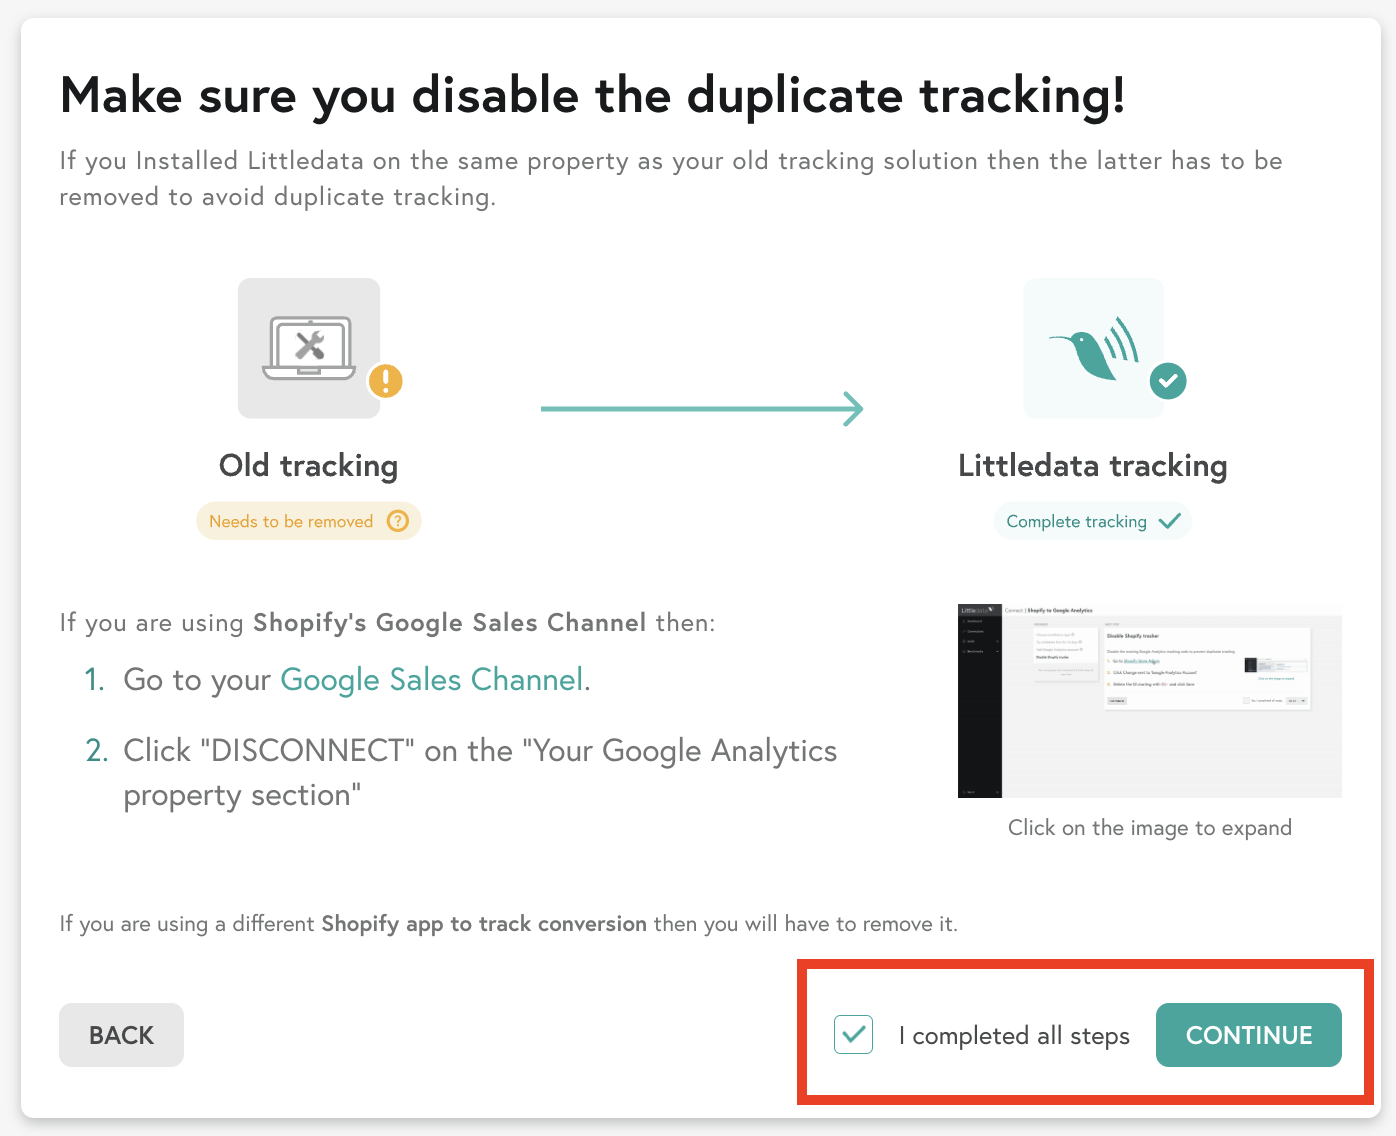 Disable the duplicate tracking